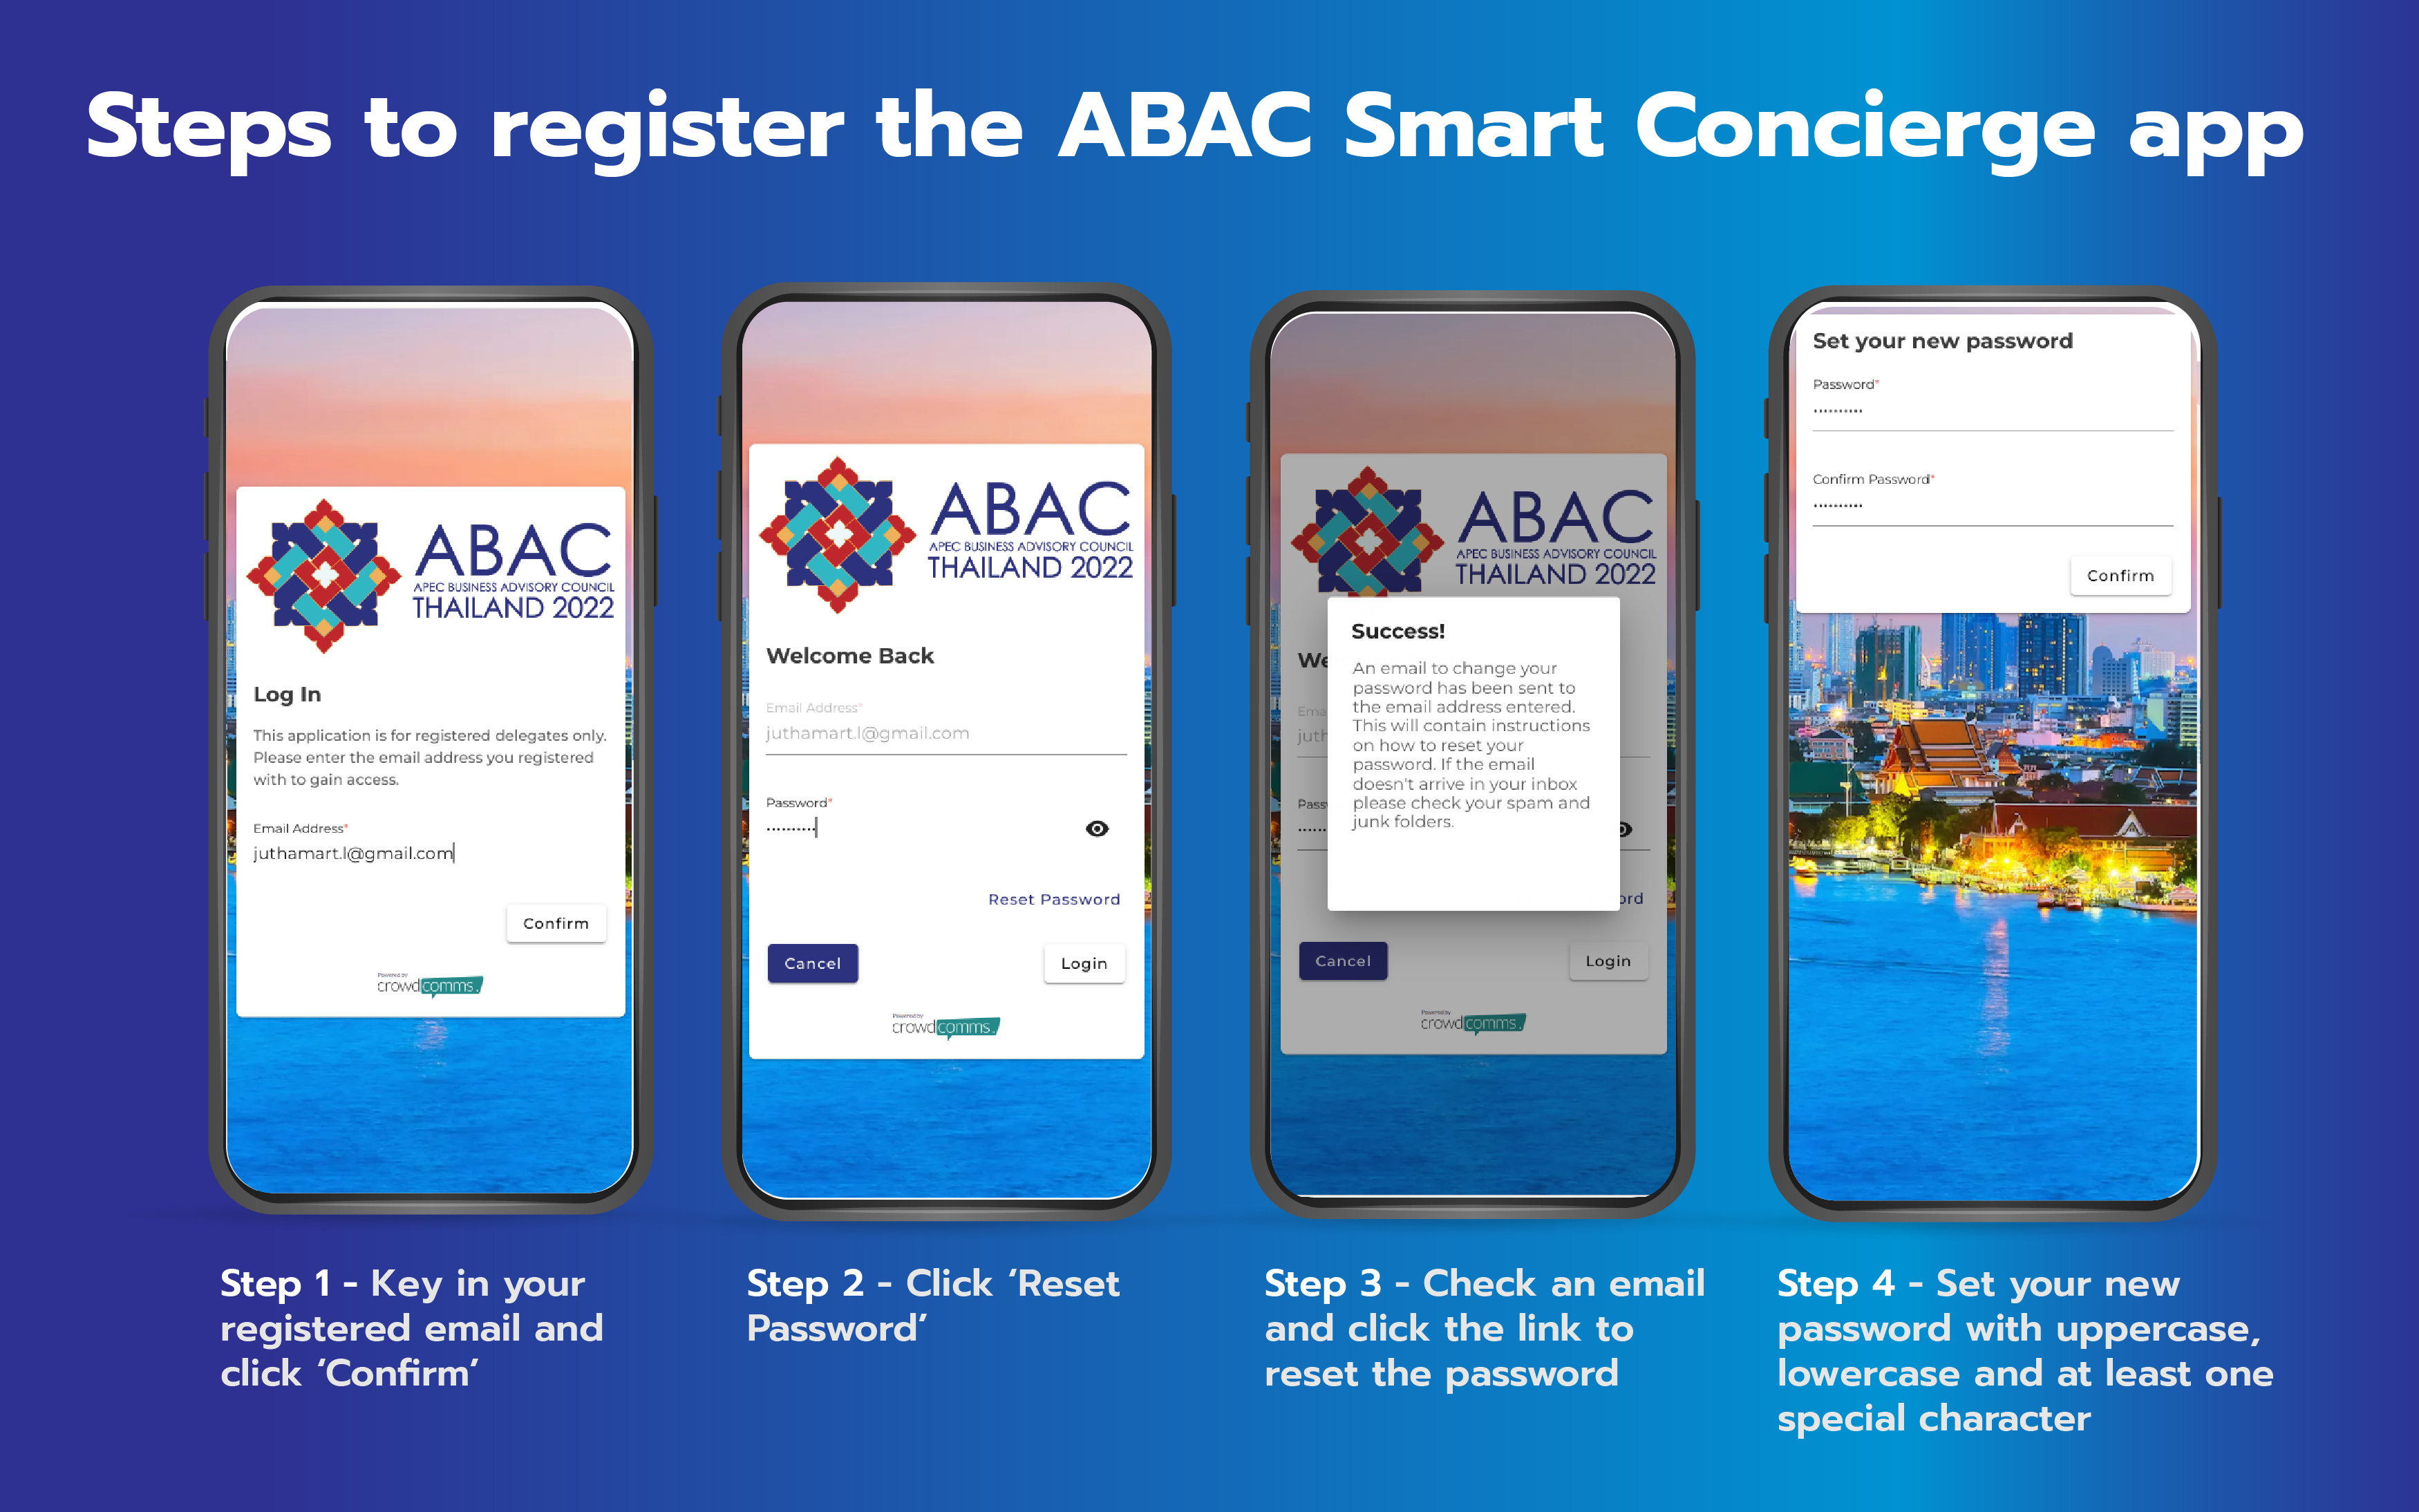 how to log in the ABAC app